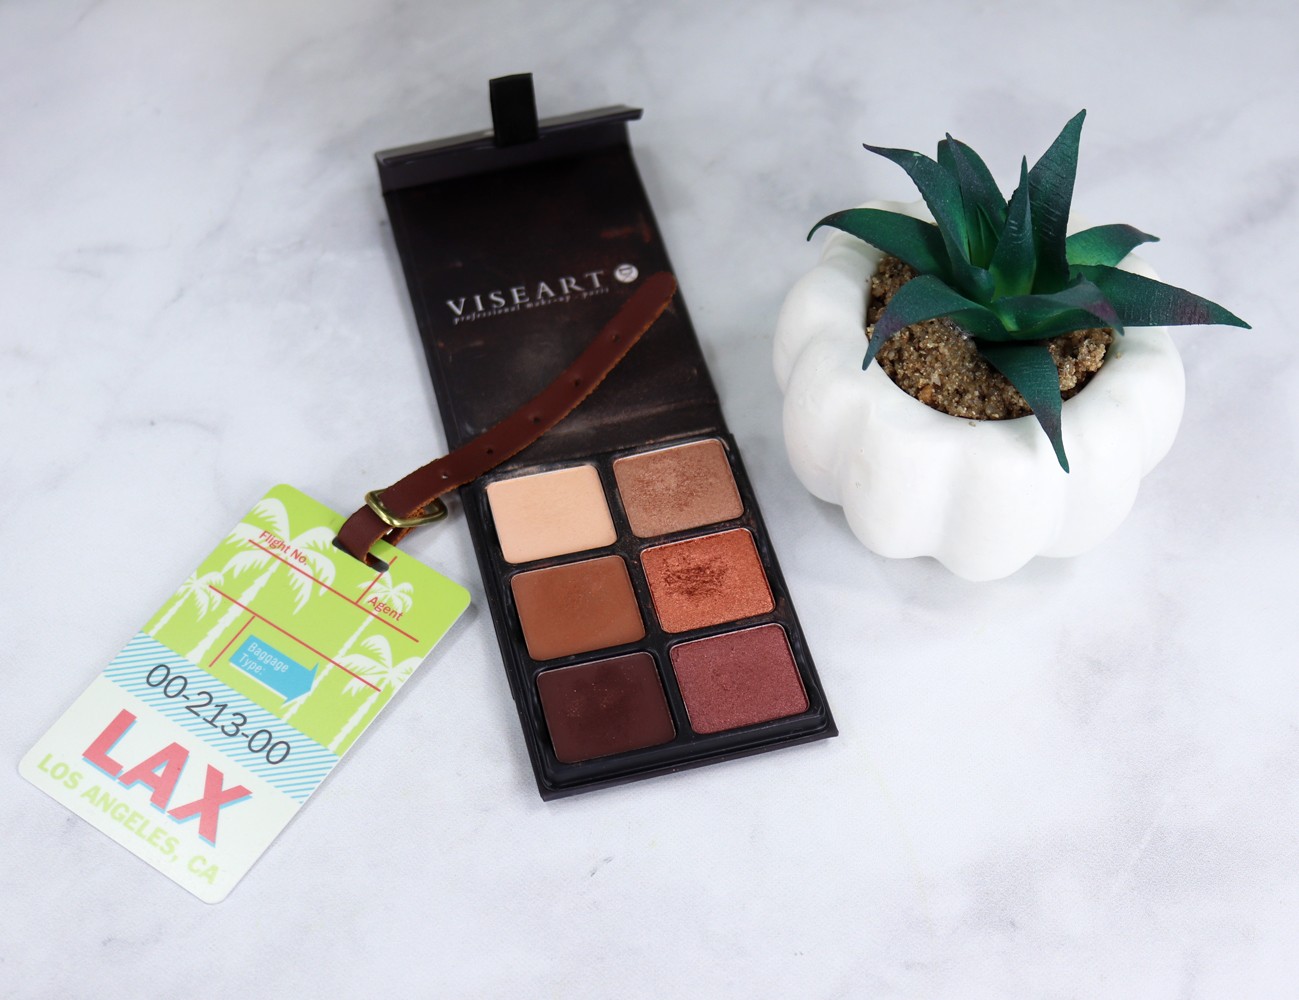 Viseart Theory II Minx Palette Review